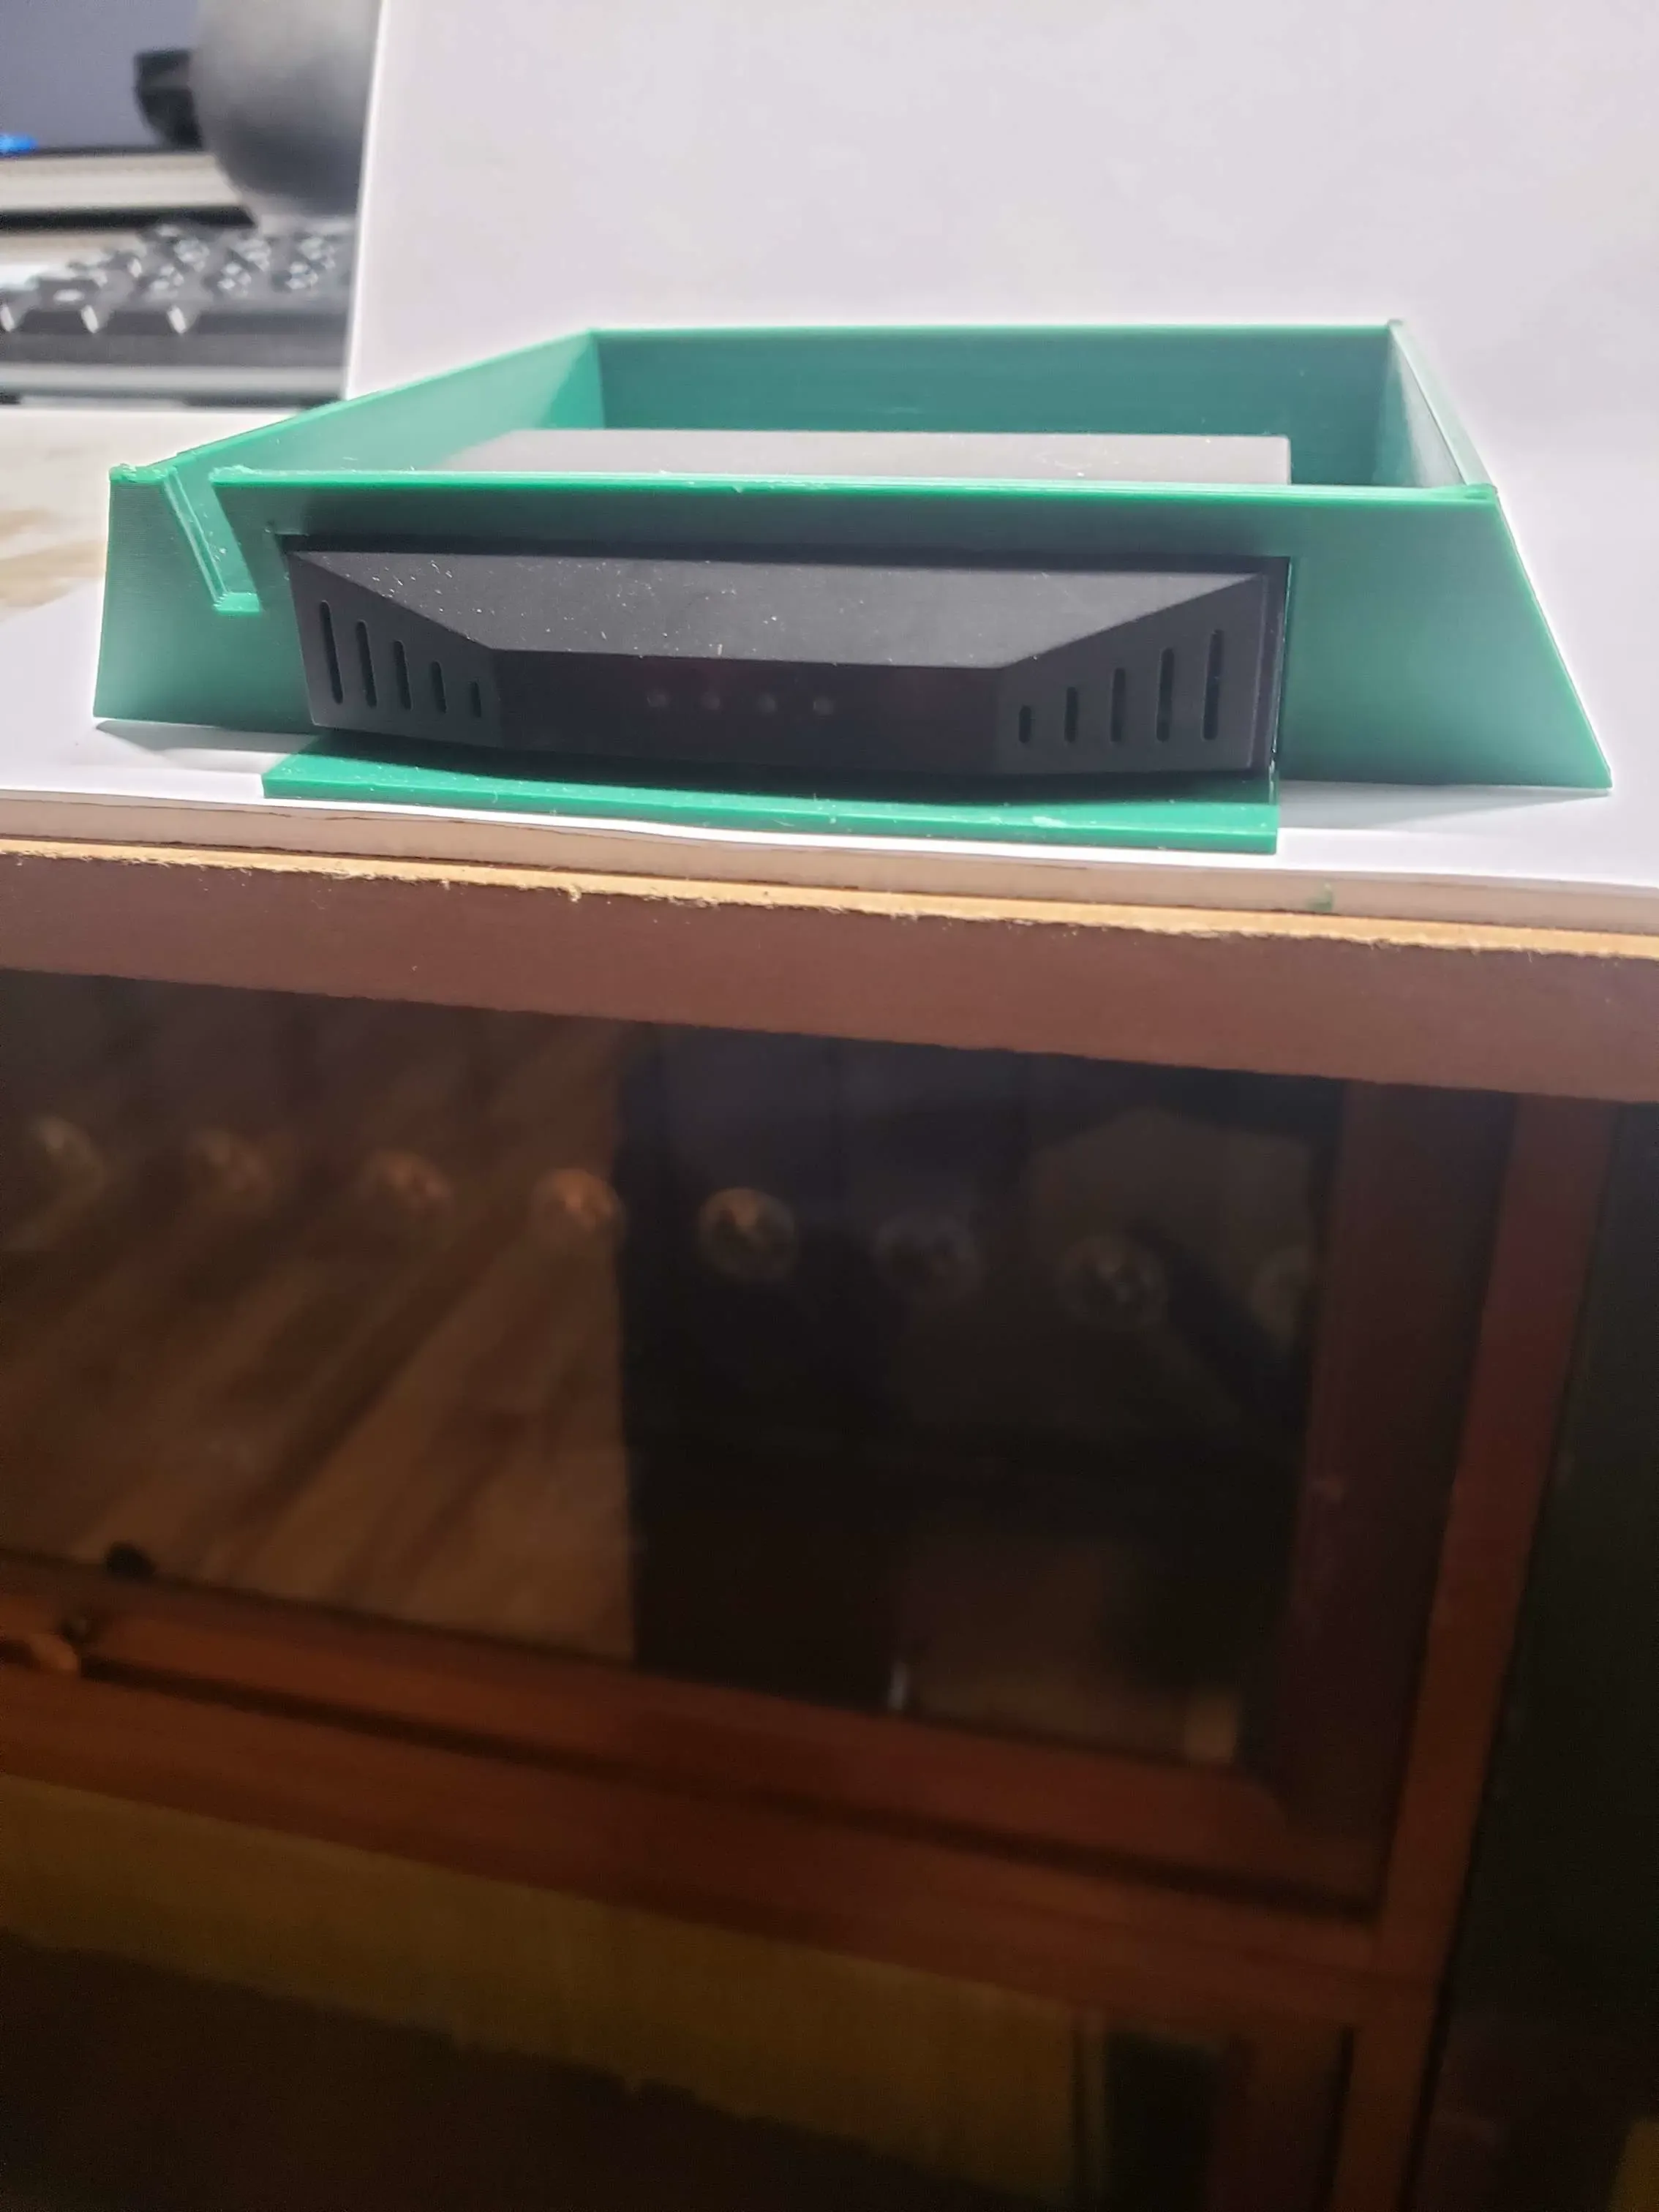 Ender 3 S1 Drawer for Creality WIFI Box